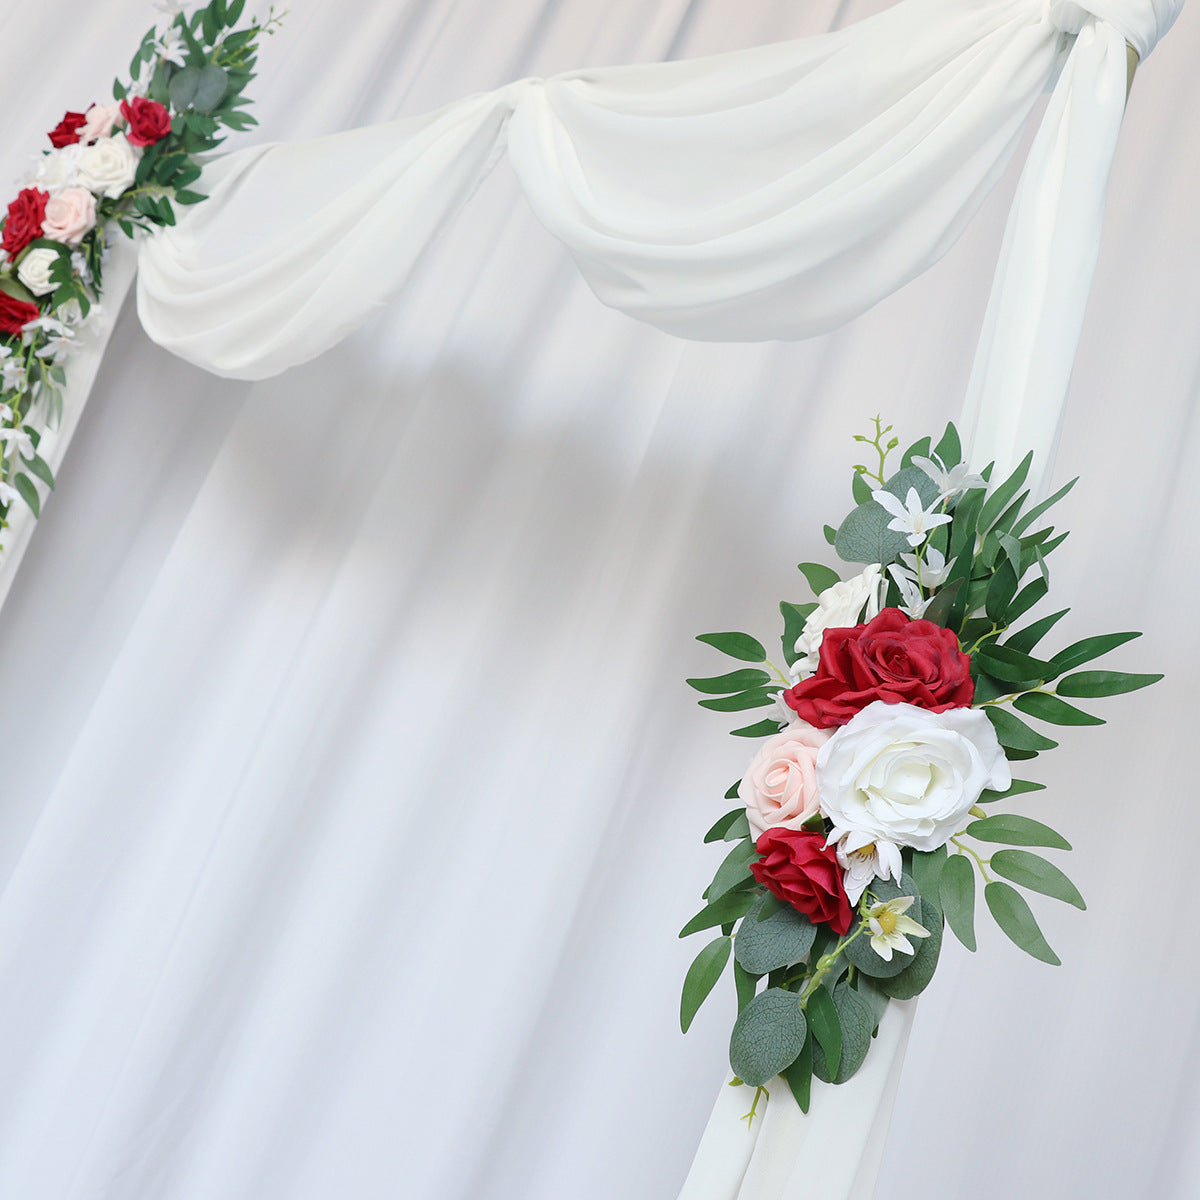 Wedding Arch Flowers Decor with Red Pink Roses